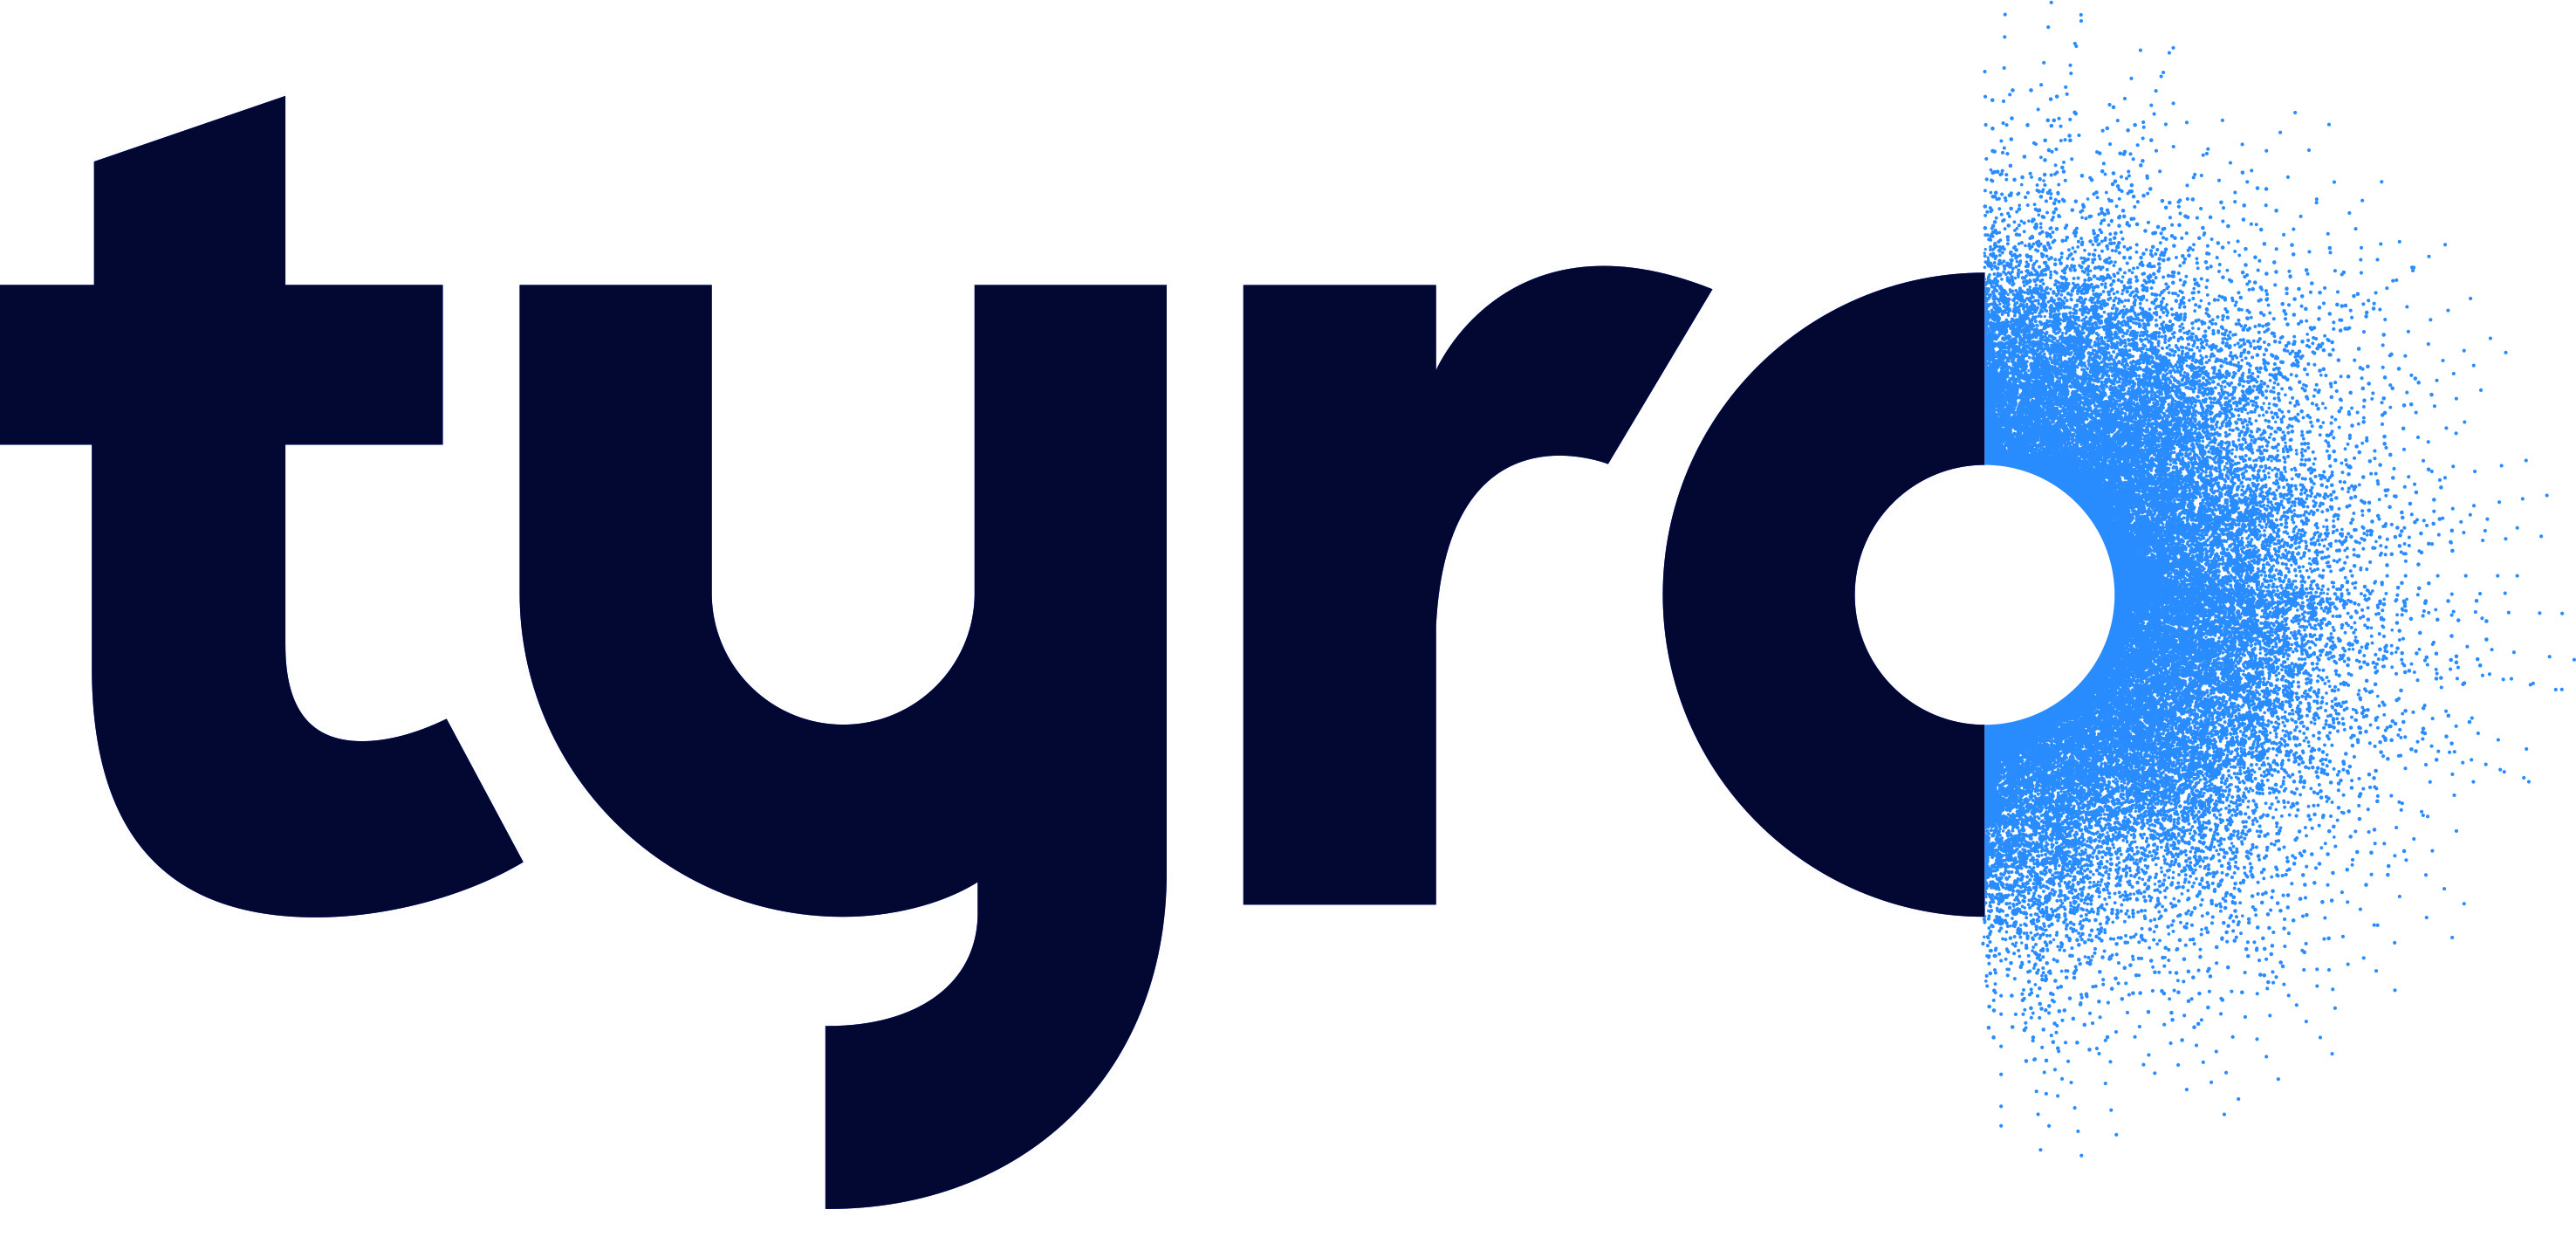 Tyro Payments